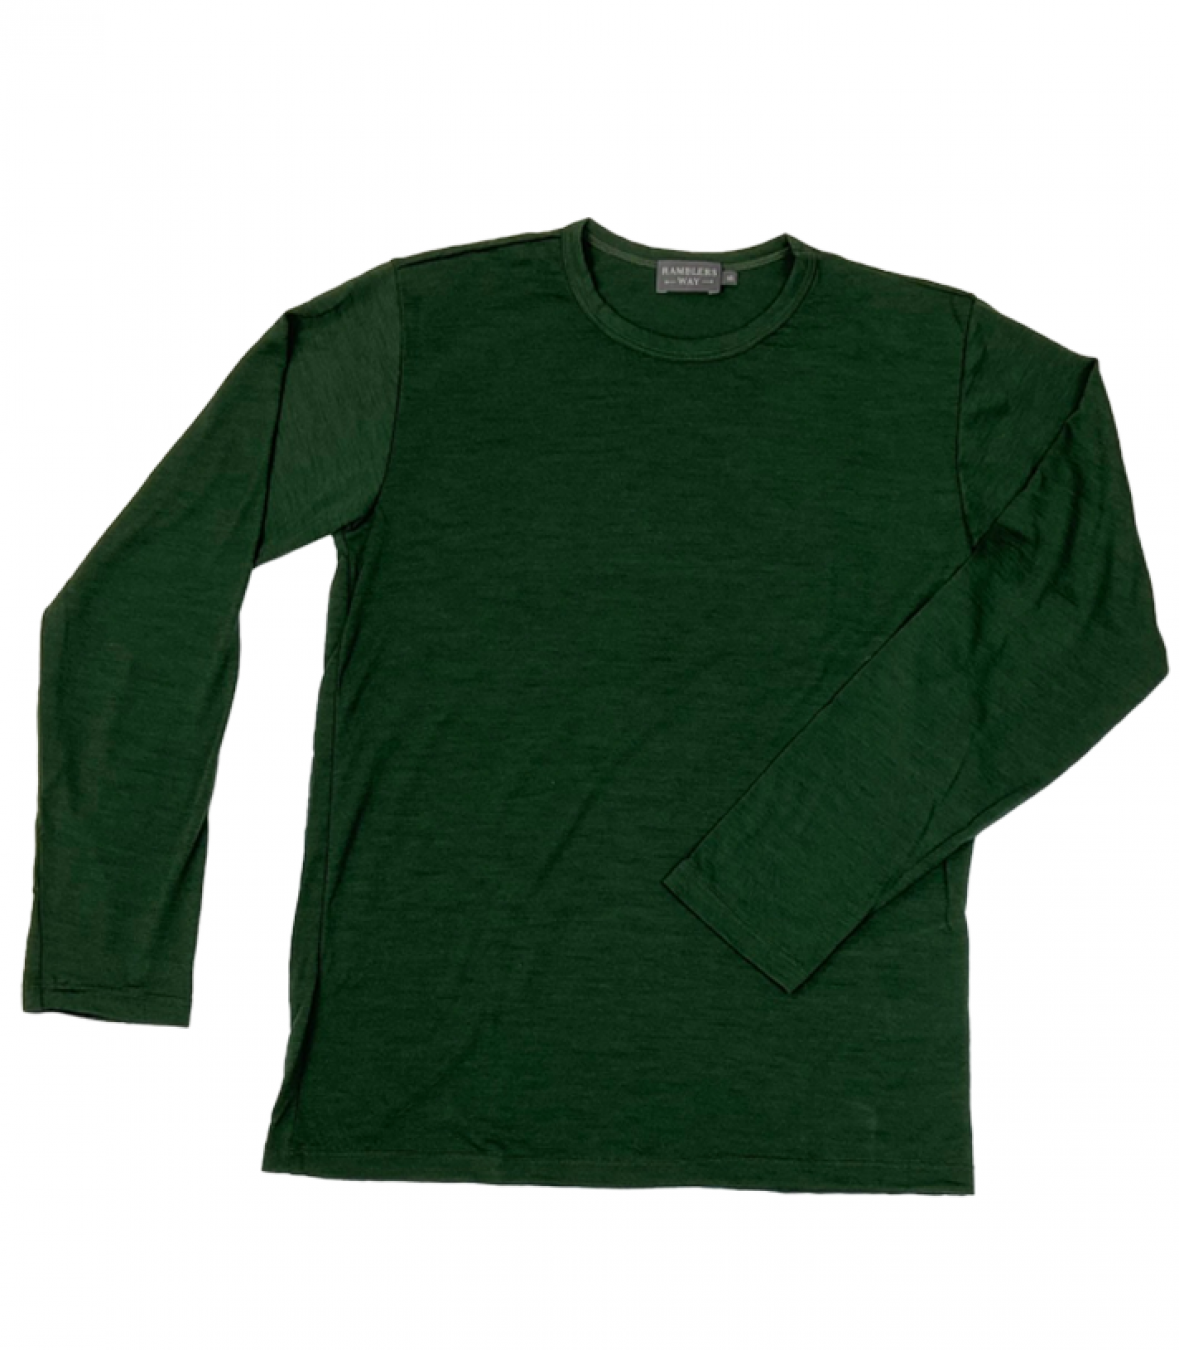 Wool Crew Neck LS - Additional Colors Made in USA | RAMBLERS WAY